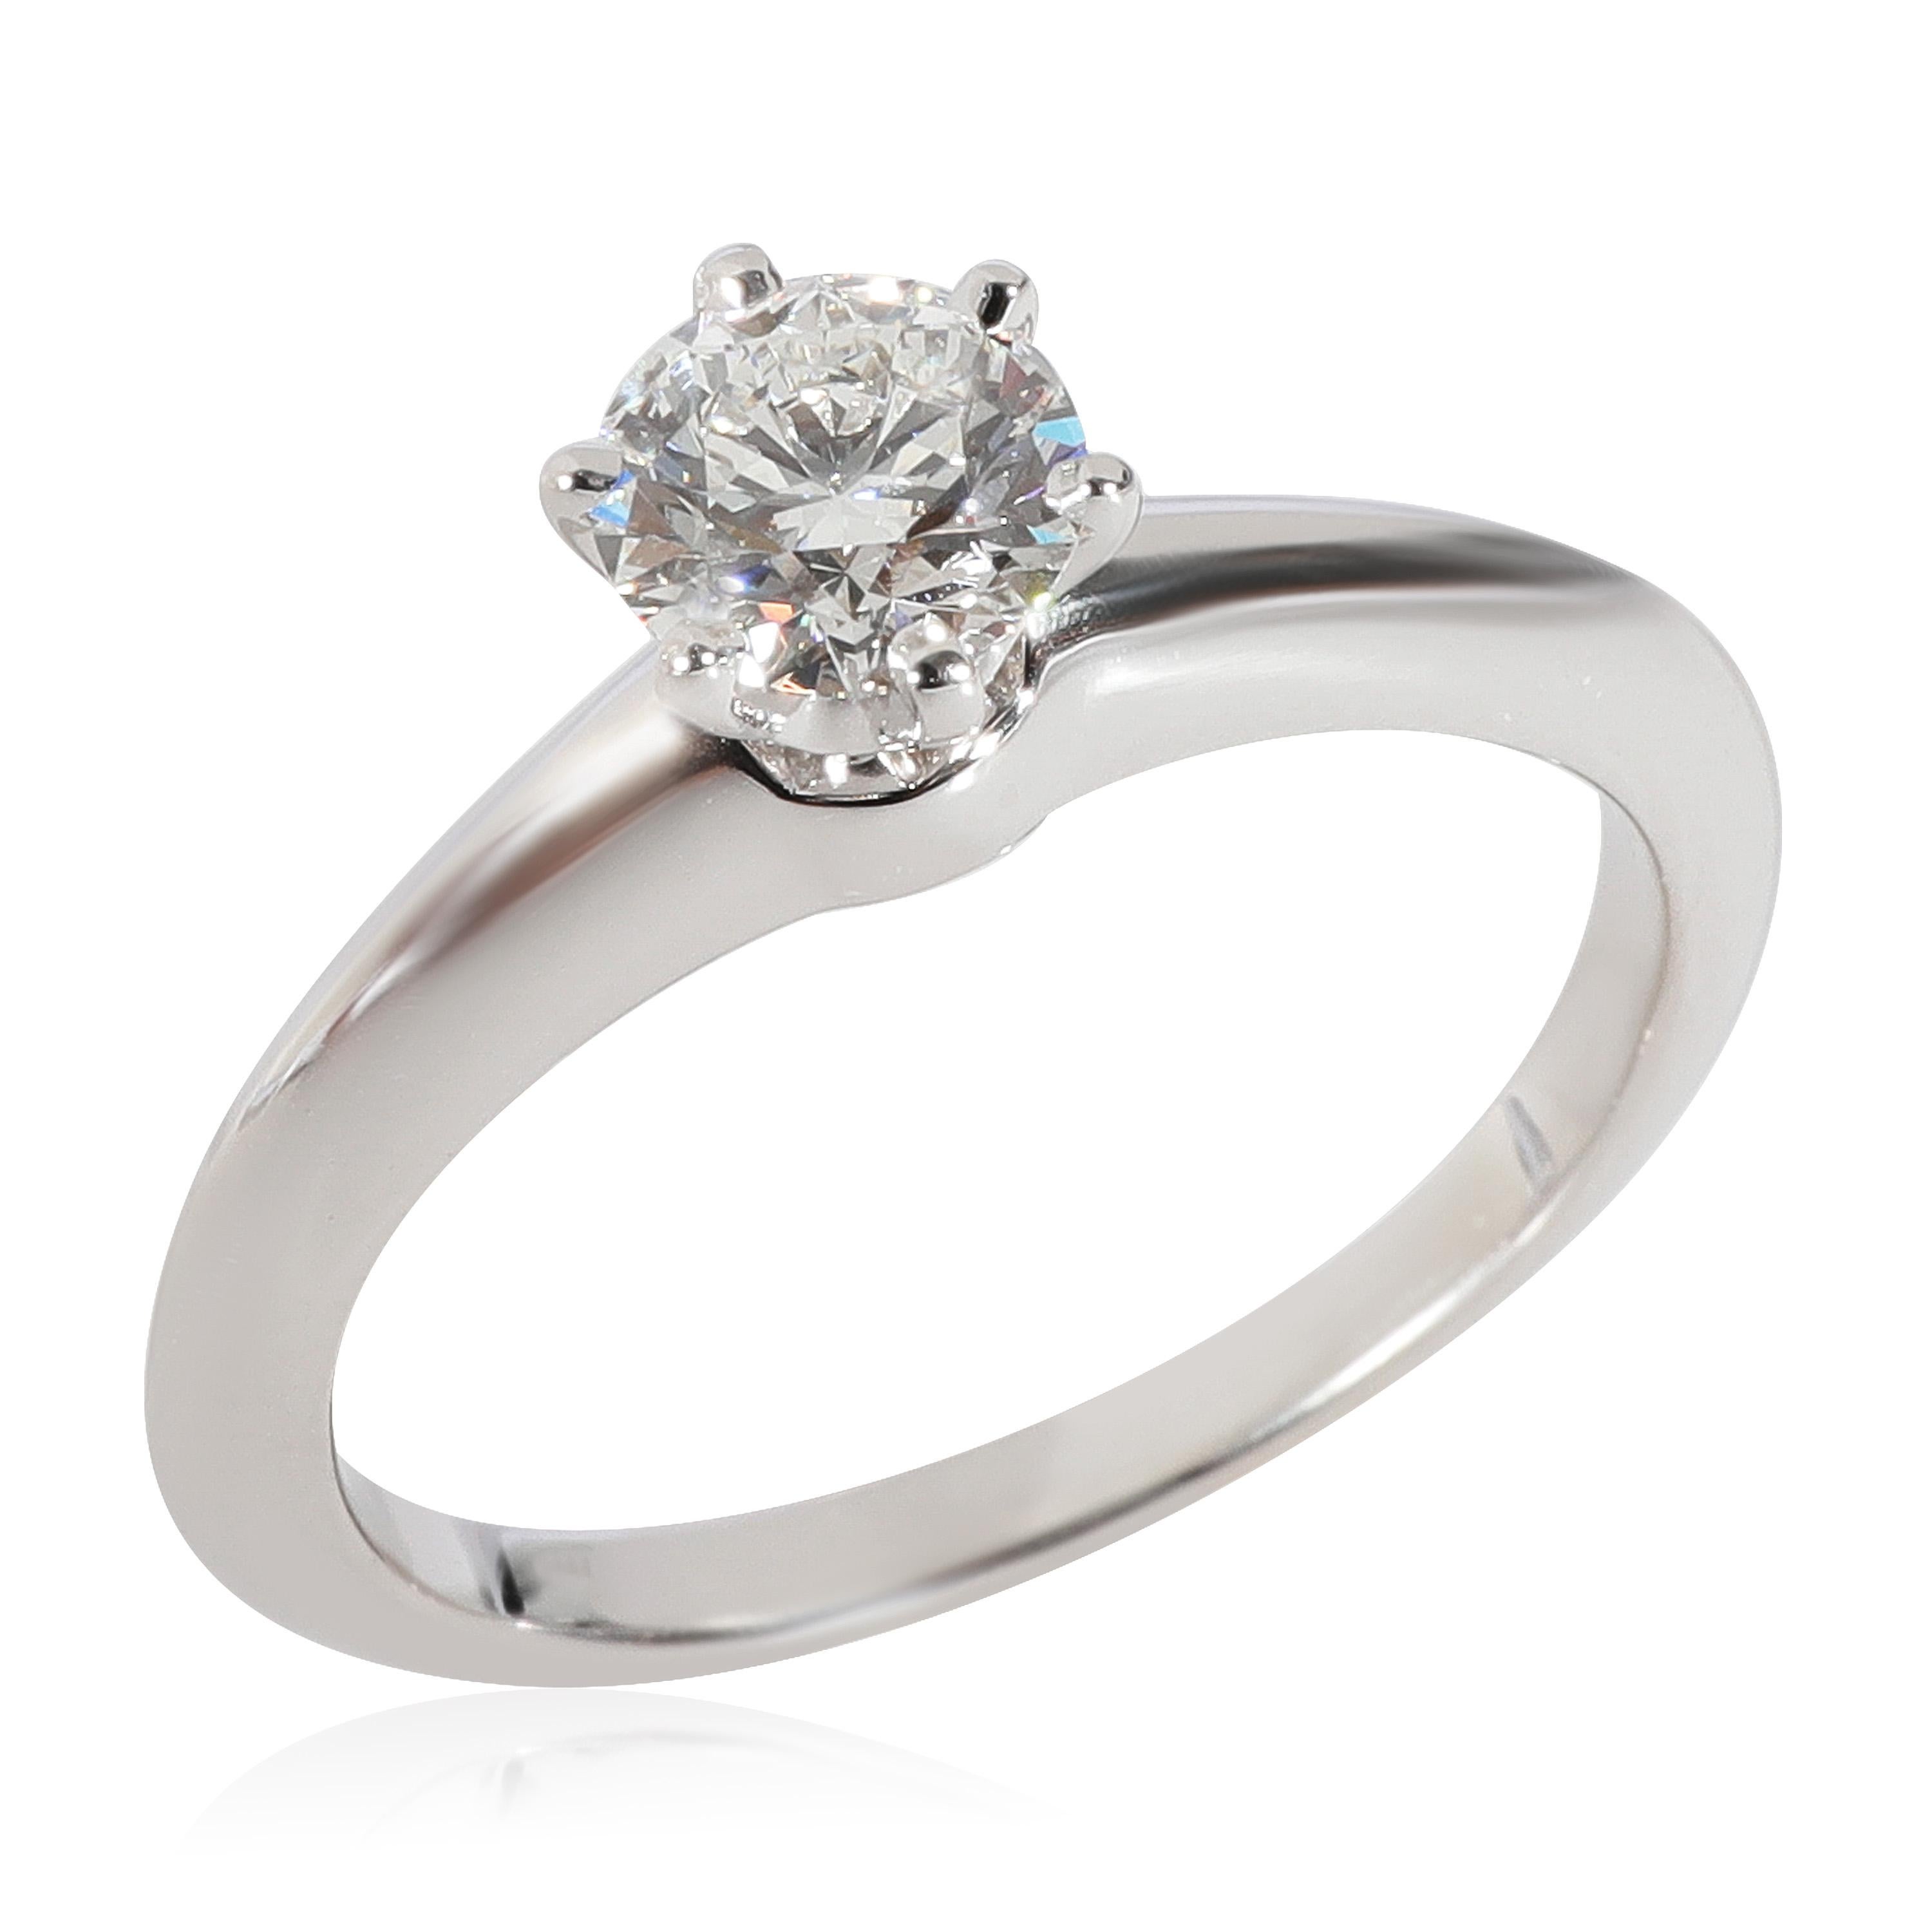 Tiffany & Co. Tiffany Setting Diamond Solitaire Ring in 950 Platinum H VS2 0.58 In Excellent Condition For Sale In New York, NY